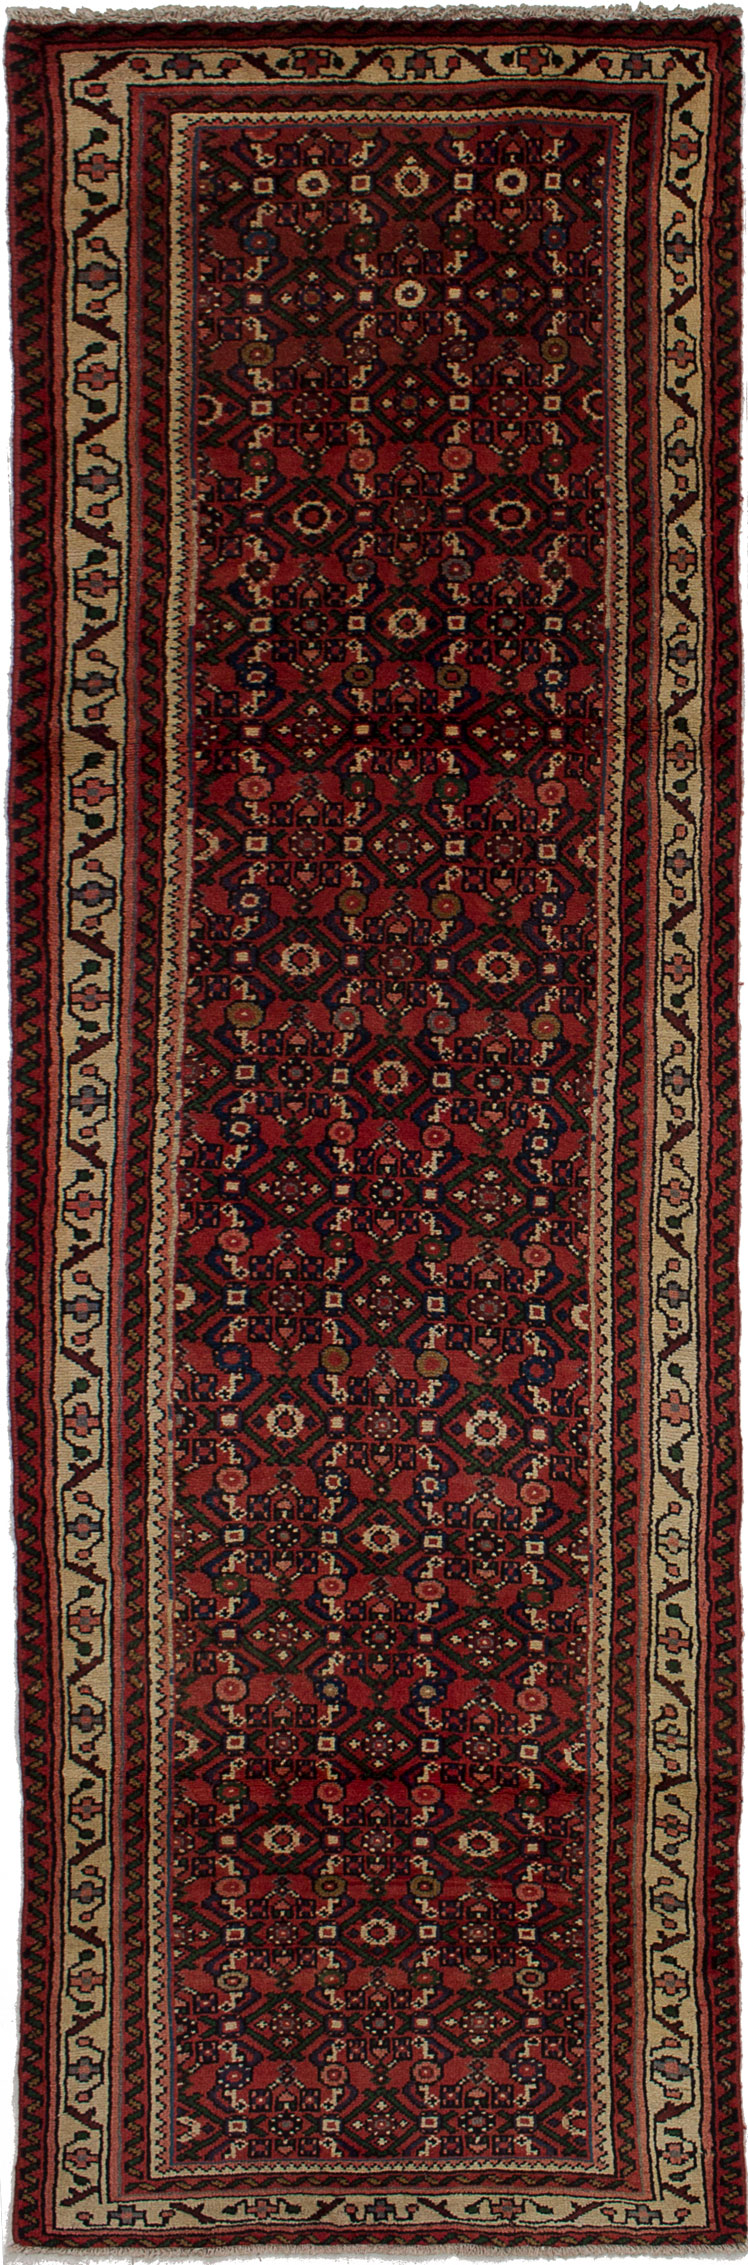 Hand-knotted Koliai Red Wool Rug 2'8" x 8'8" Size: 2'7" x 8'8"  